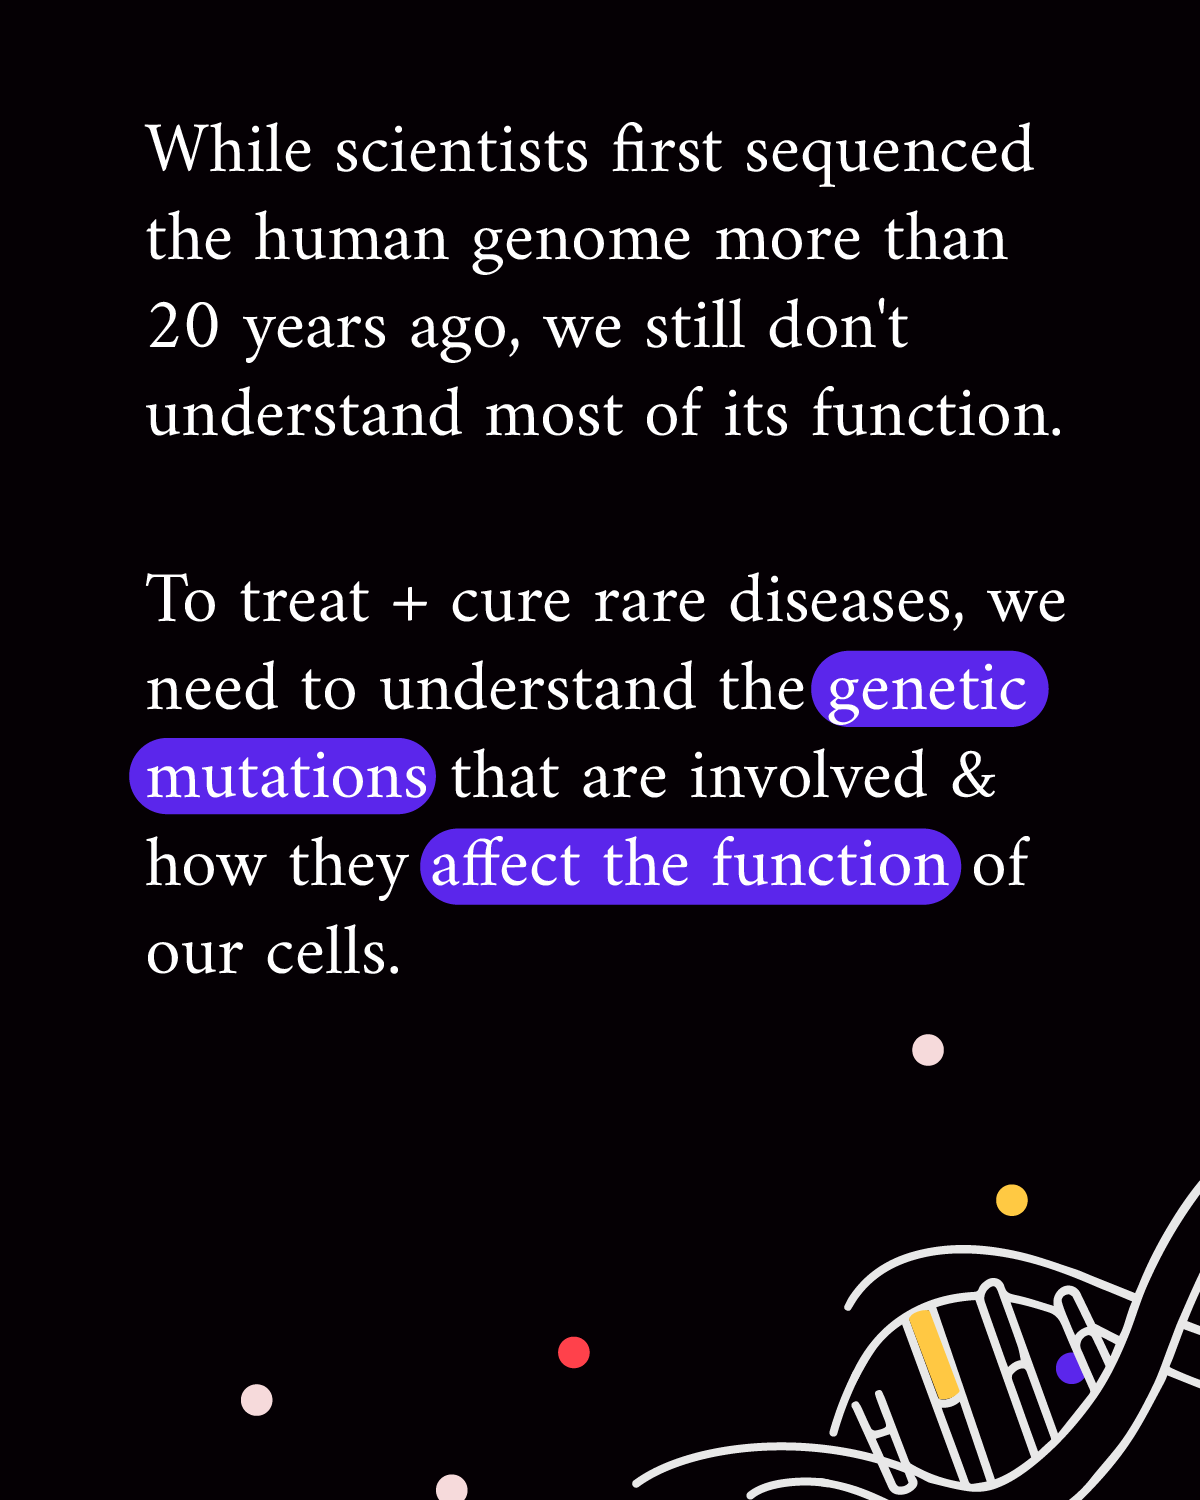 Infographic reads “While scientists first sequenced the human genome more than 20 years ago, we still don’t understand most of its function. To treat + cure rare diseases, we need to understand the genetic mutations that are involved & how they affect the function of our cells.” A white illustrated outline of a strand of DNA accompanies the text.